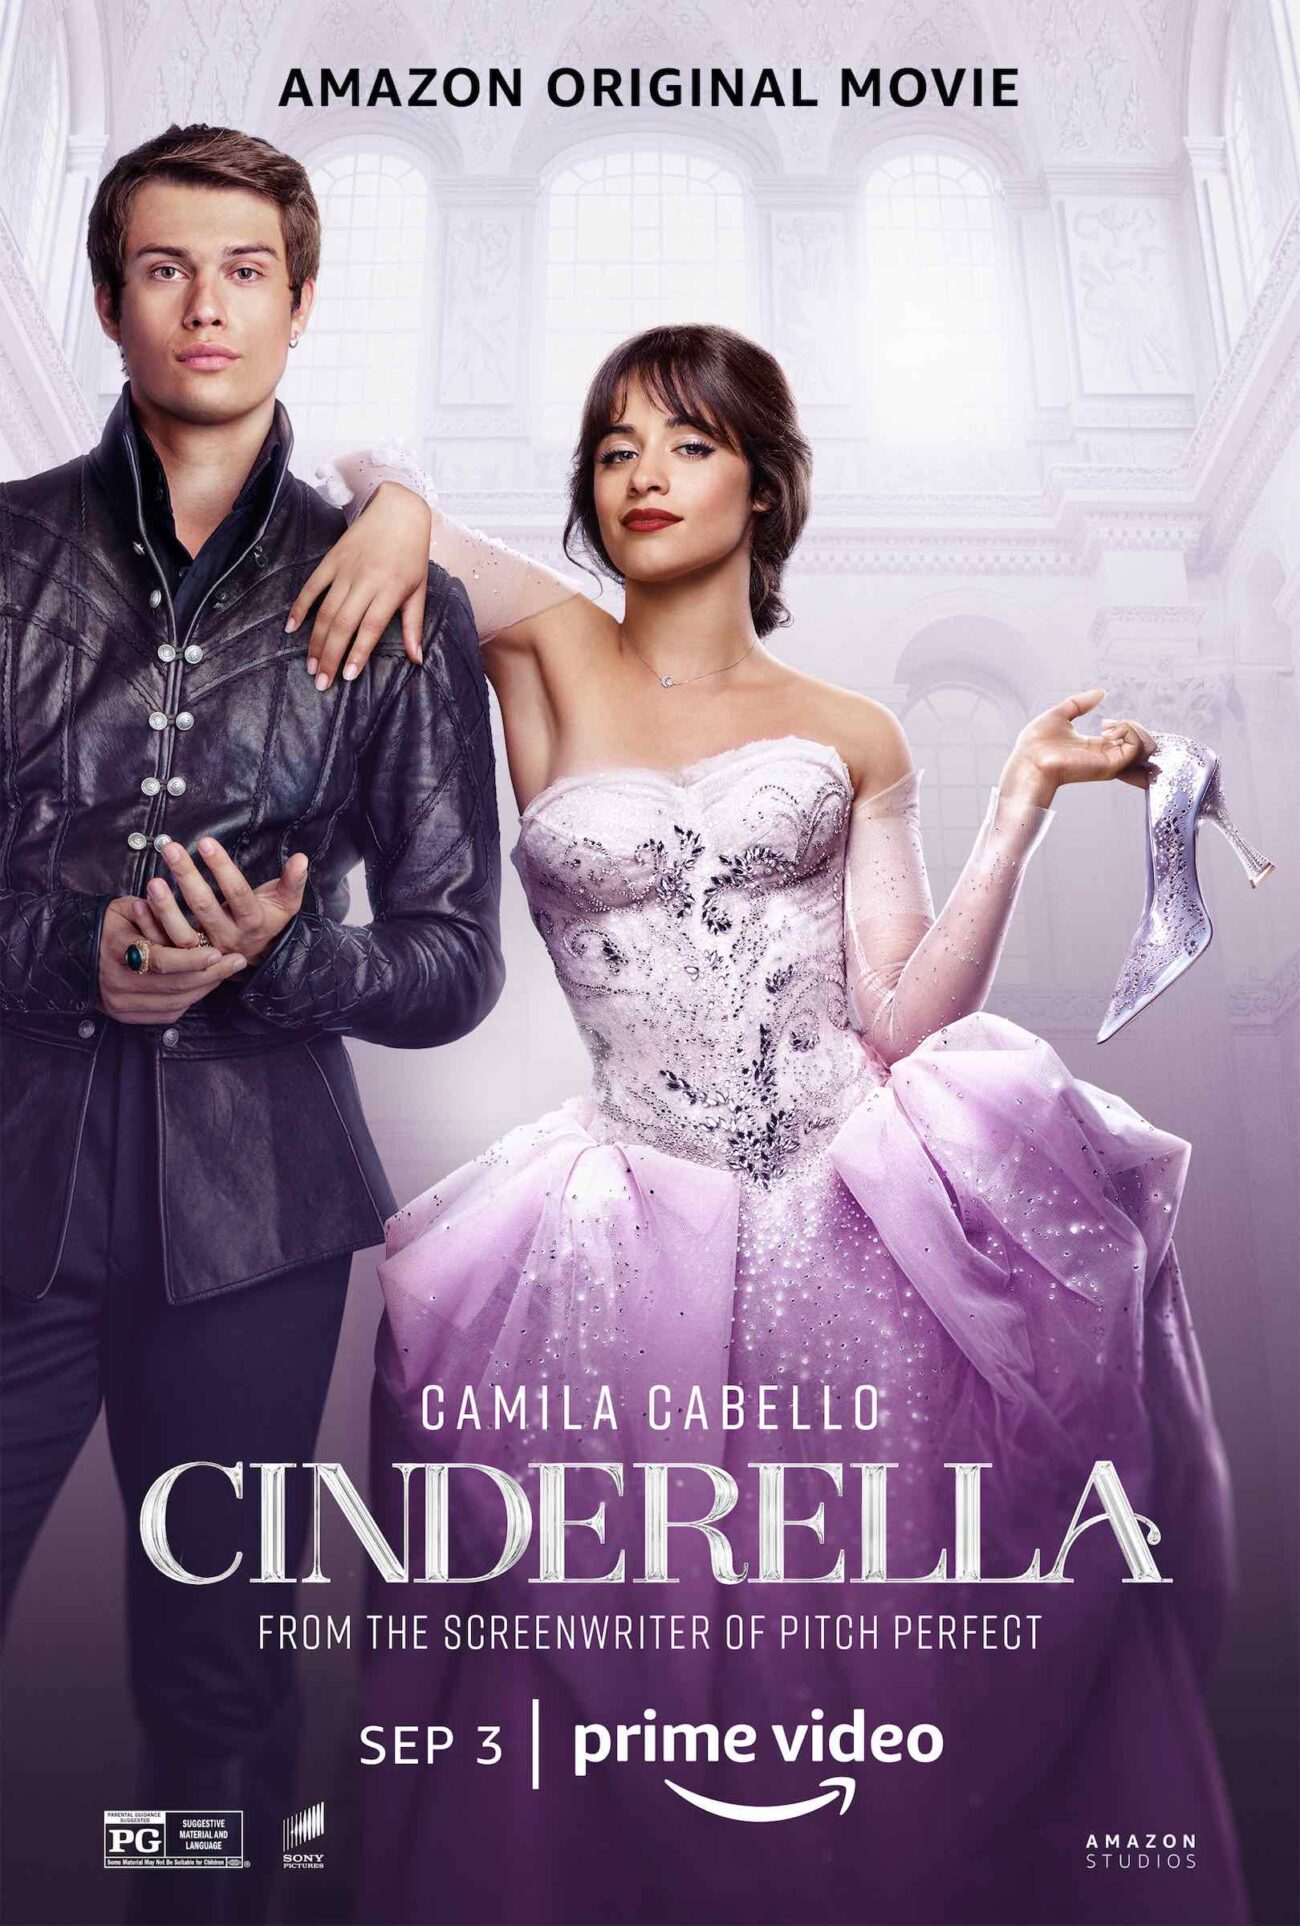 The new Cinderella movie dropped today and no fairy godmother can bippity boppity bop away the bad reviews. Get ready for the ball and dive in!